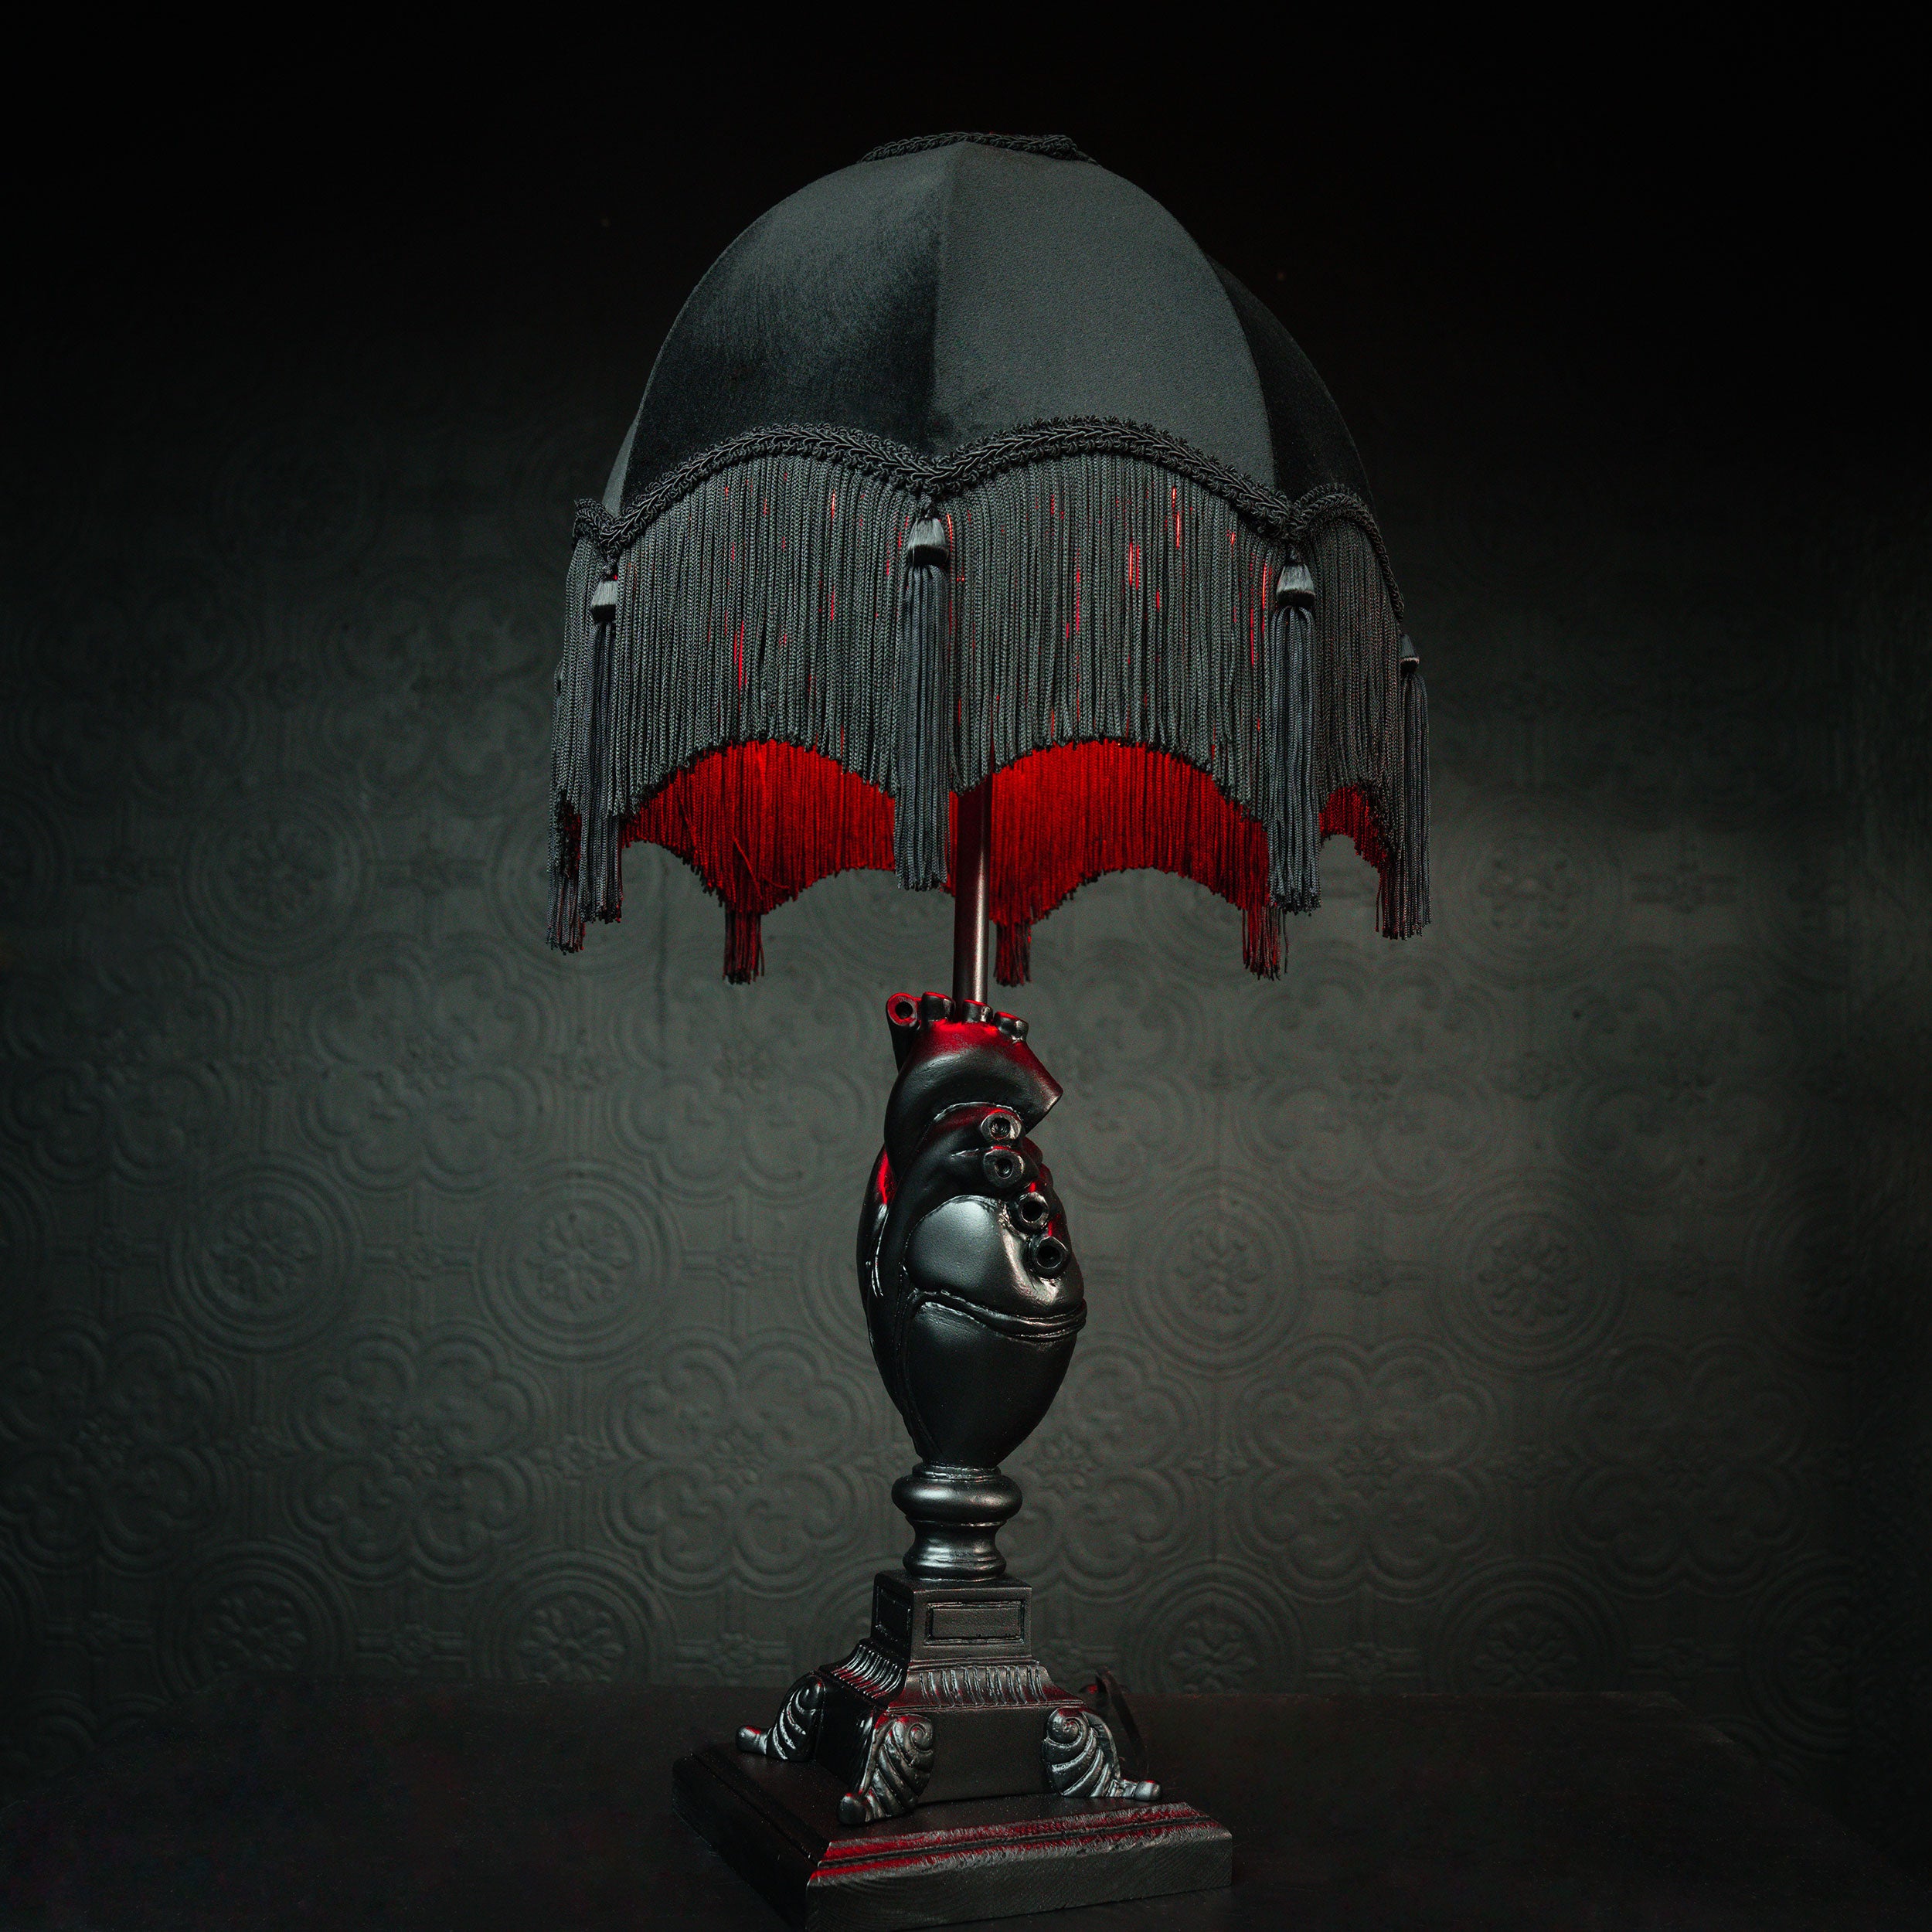 Anatomical heart lamp by the blackened teeth gothic home decor 